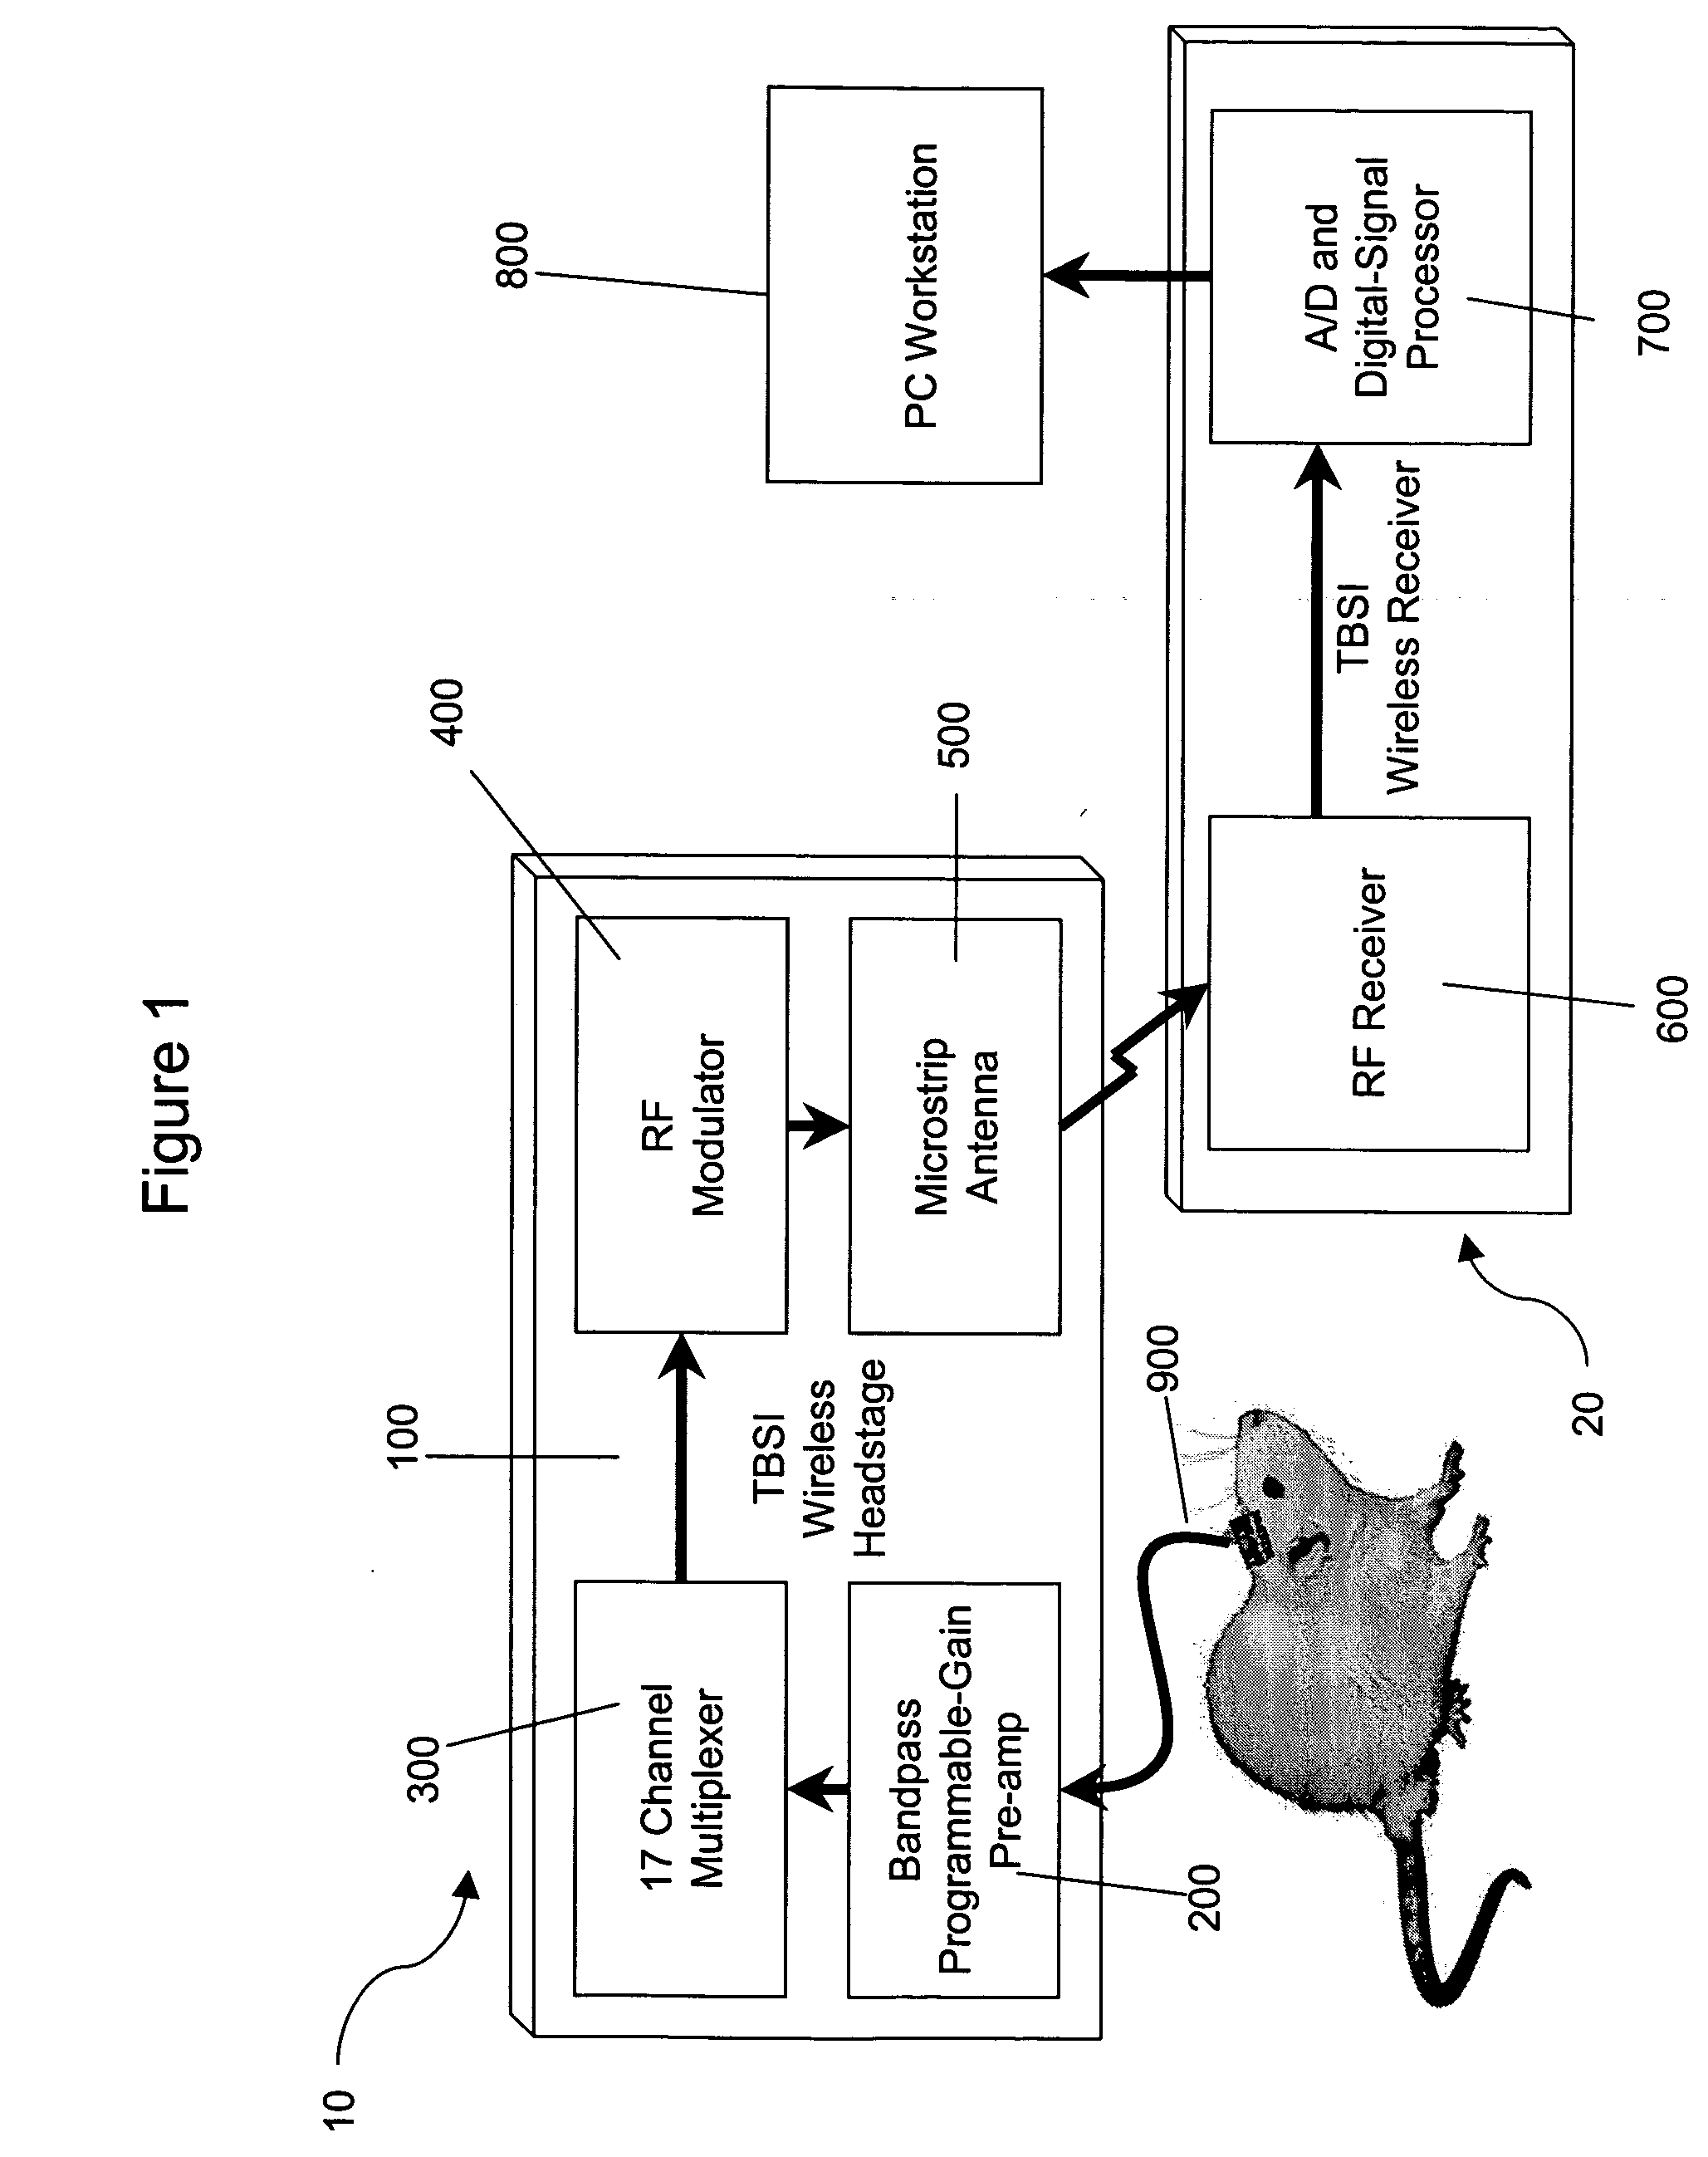 Wireless neural data acquisition system